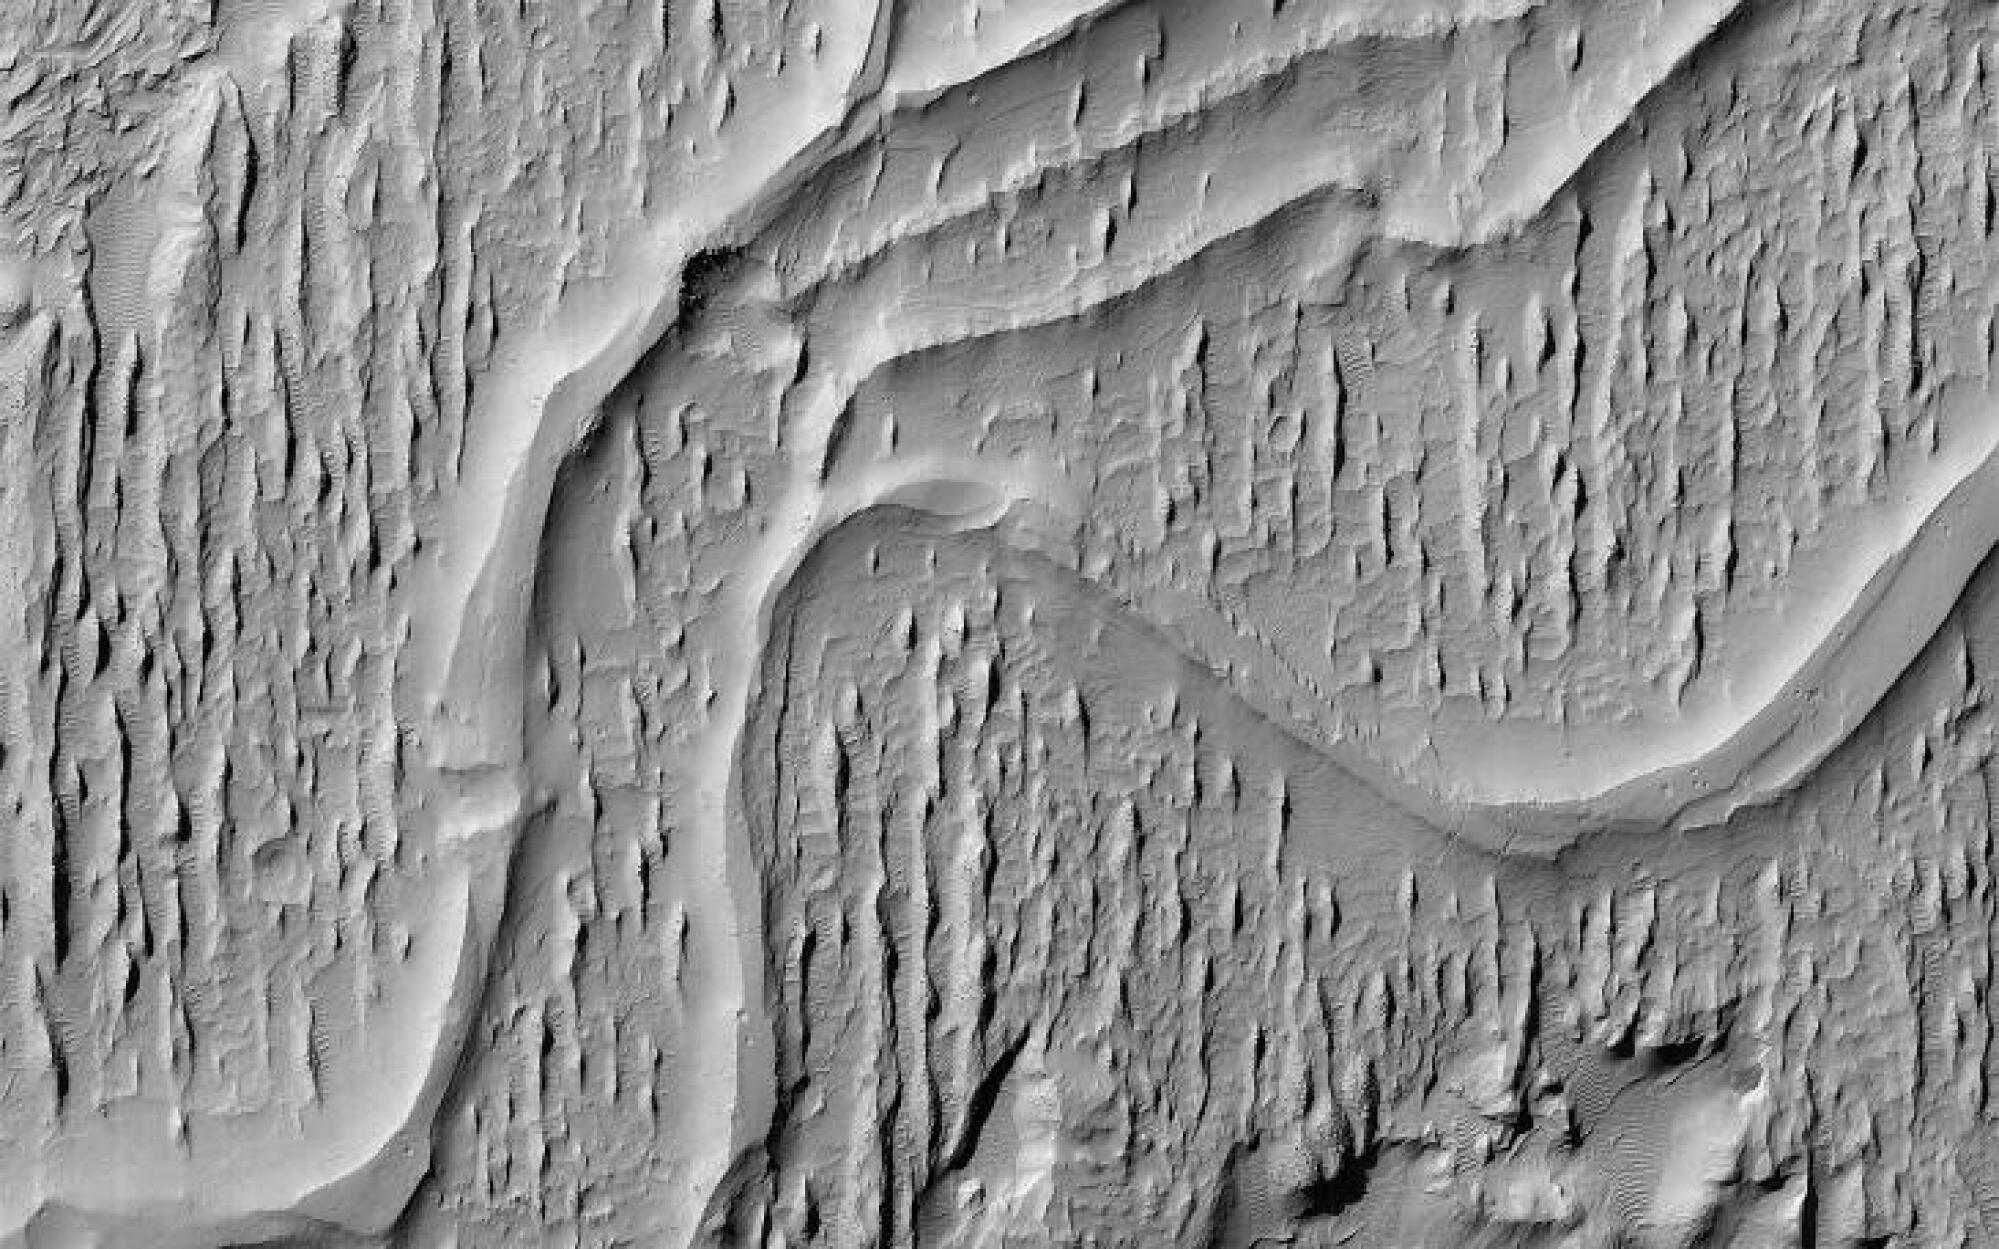 NASA's Spacecraft Captures Photo of Age-Old, Meandering Rivers on Mars